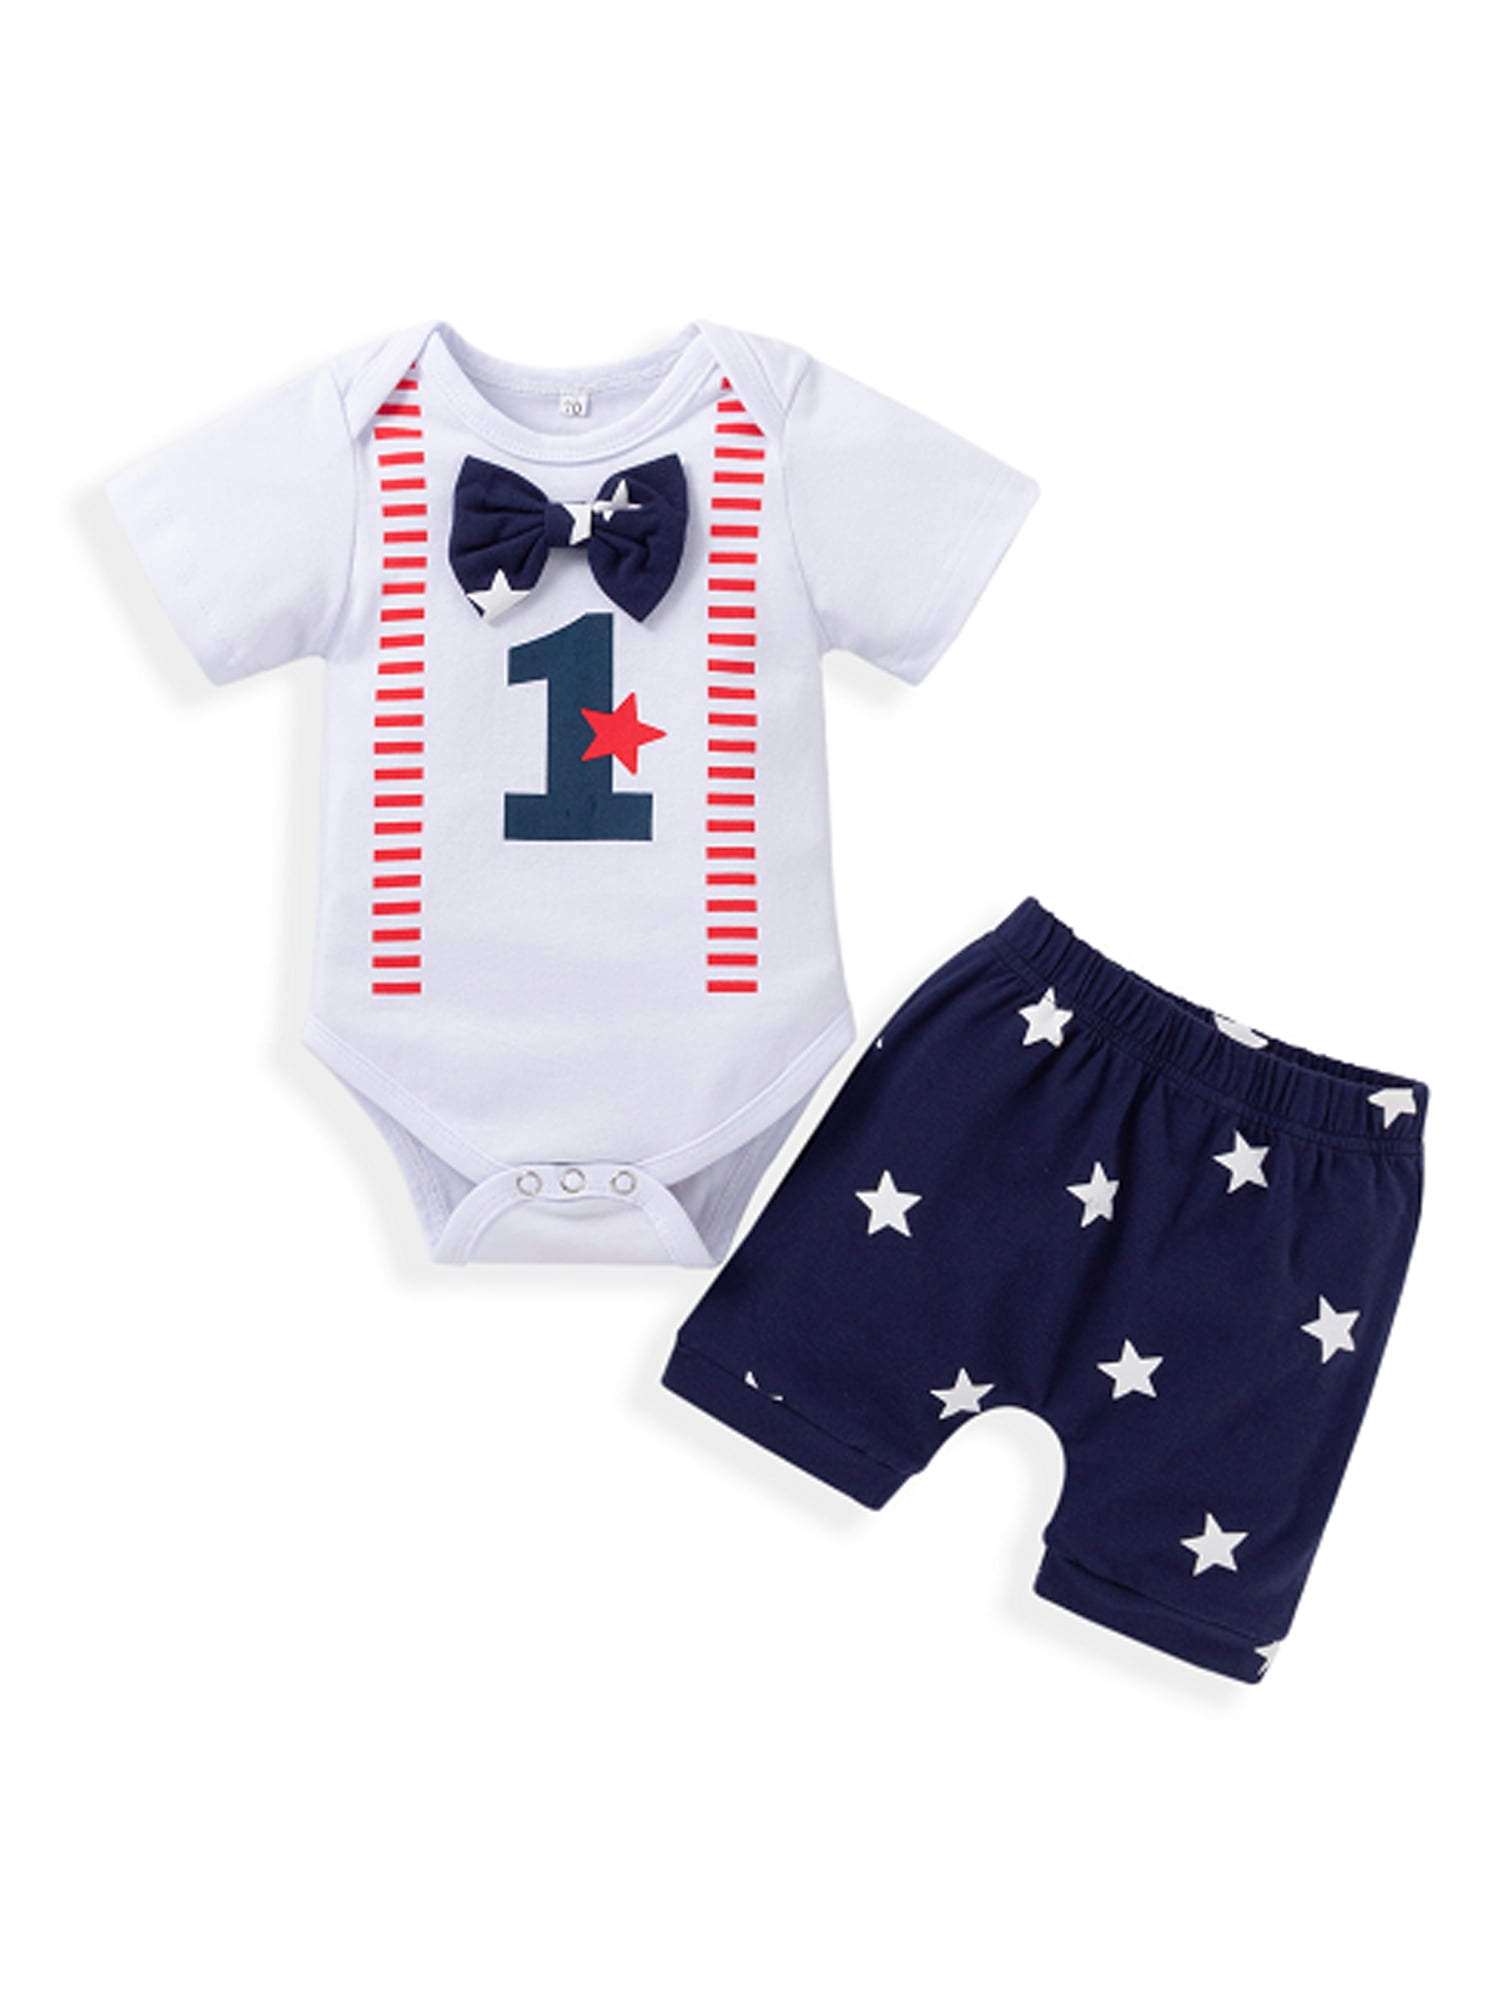 YOUNGER STAR Newborn Infanty Baby 2pcs Summer Outfits Cotton Romper US Flag Shorts My First 4th of July Independence Day